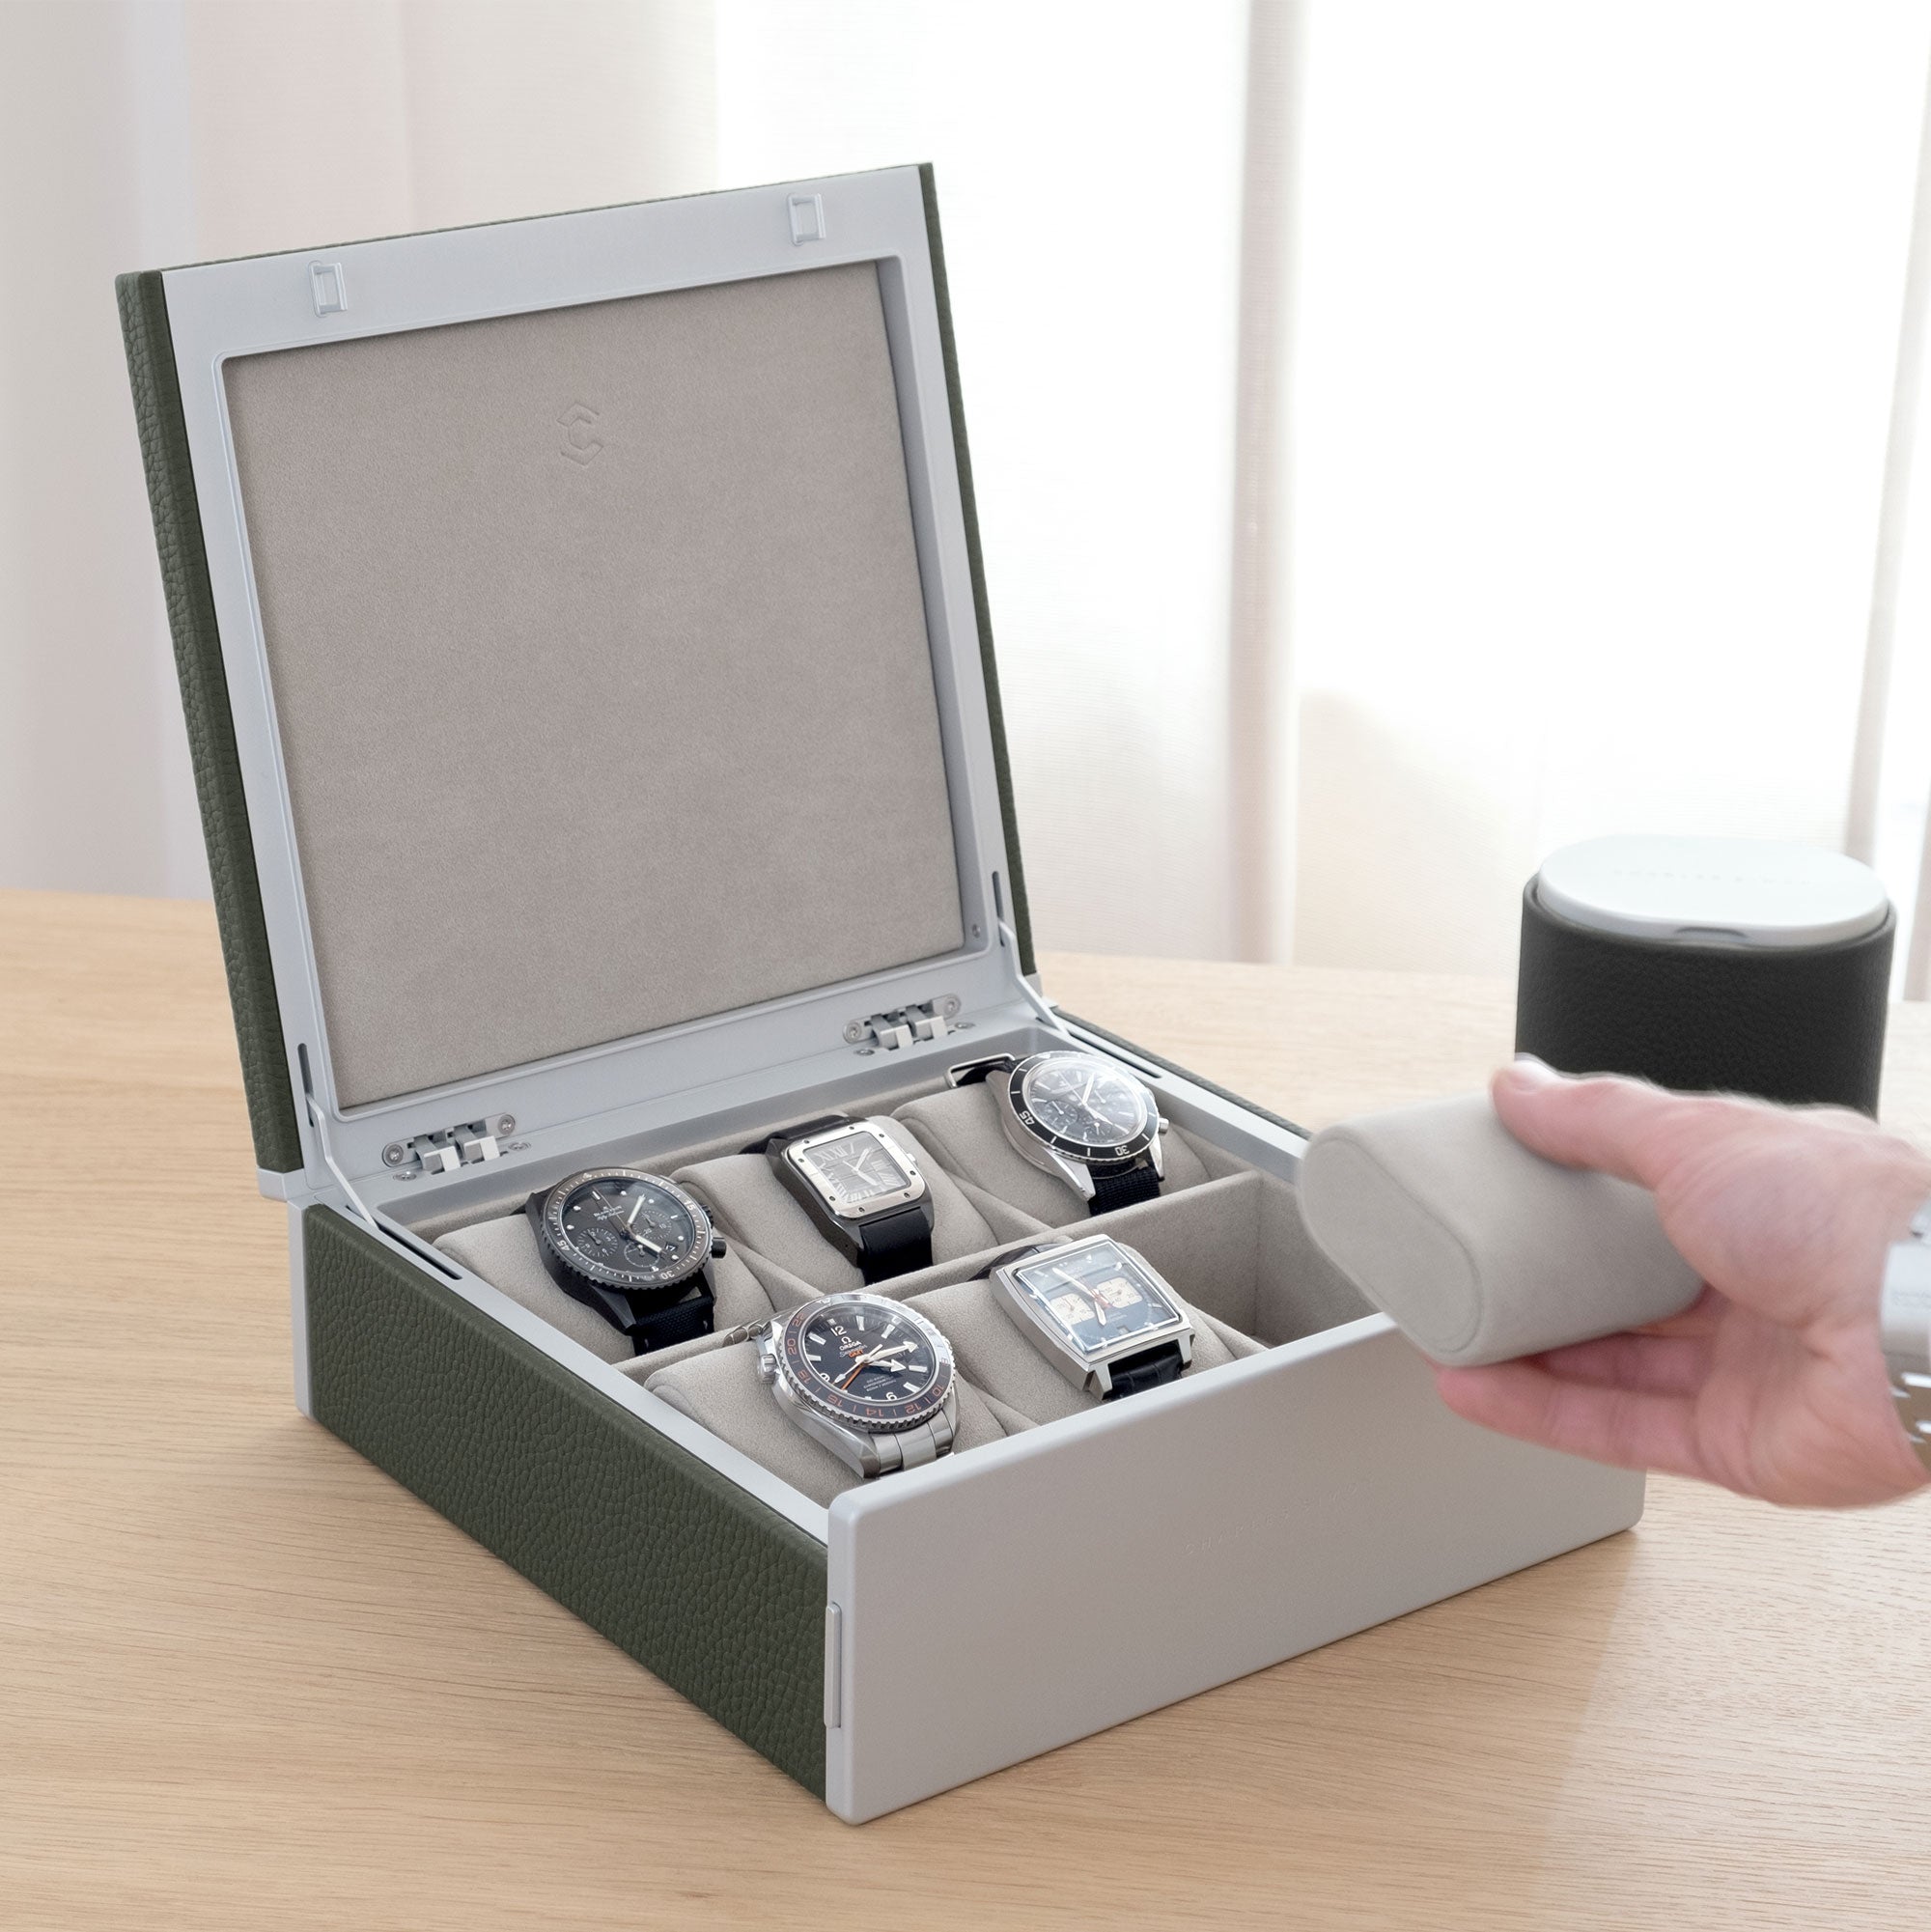 Luxury lifestyle shot of Spence watch box for 6 watches filled with men's luxury watches including Rolex, IWC, Jaeger Lecoultre, Cartier and Omega. Gentleman is taking removable Alcantara cushion from the Spence watch box.